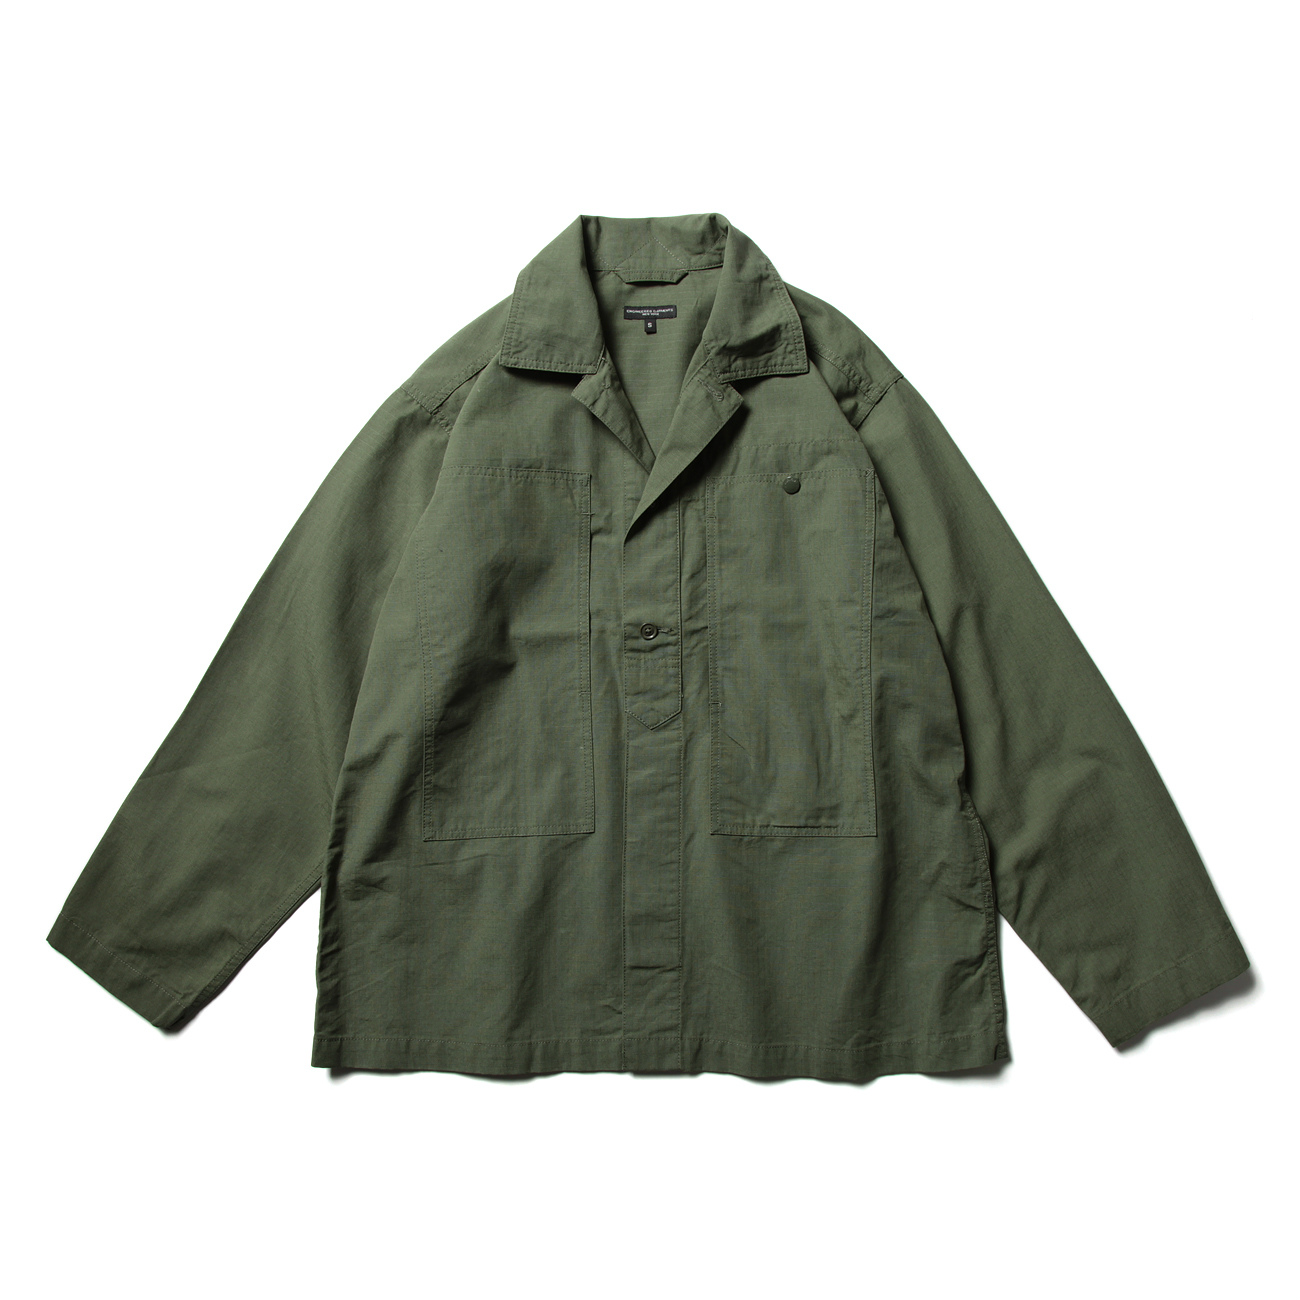 Fatigue Shirt - Cotton Ripstop - Olive